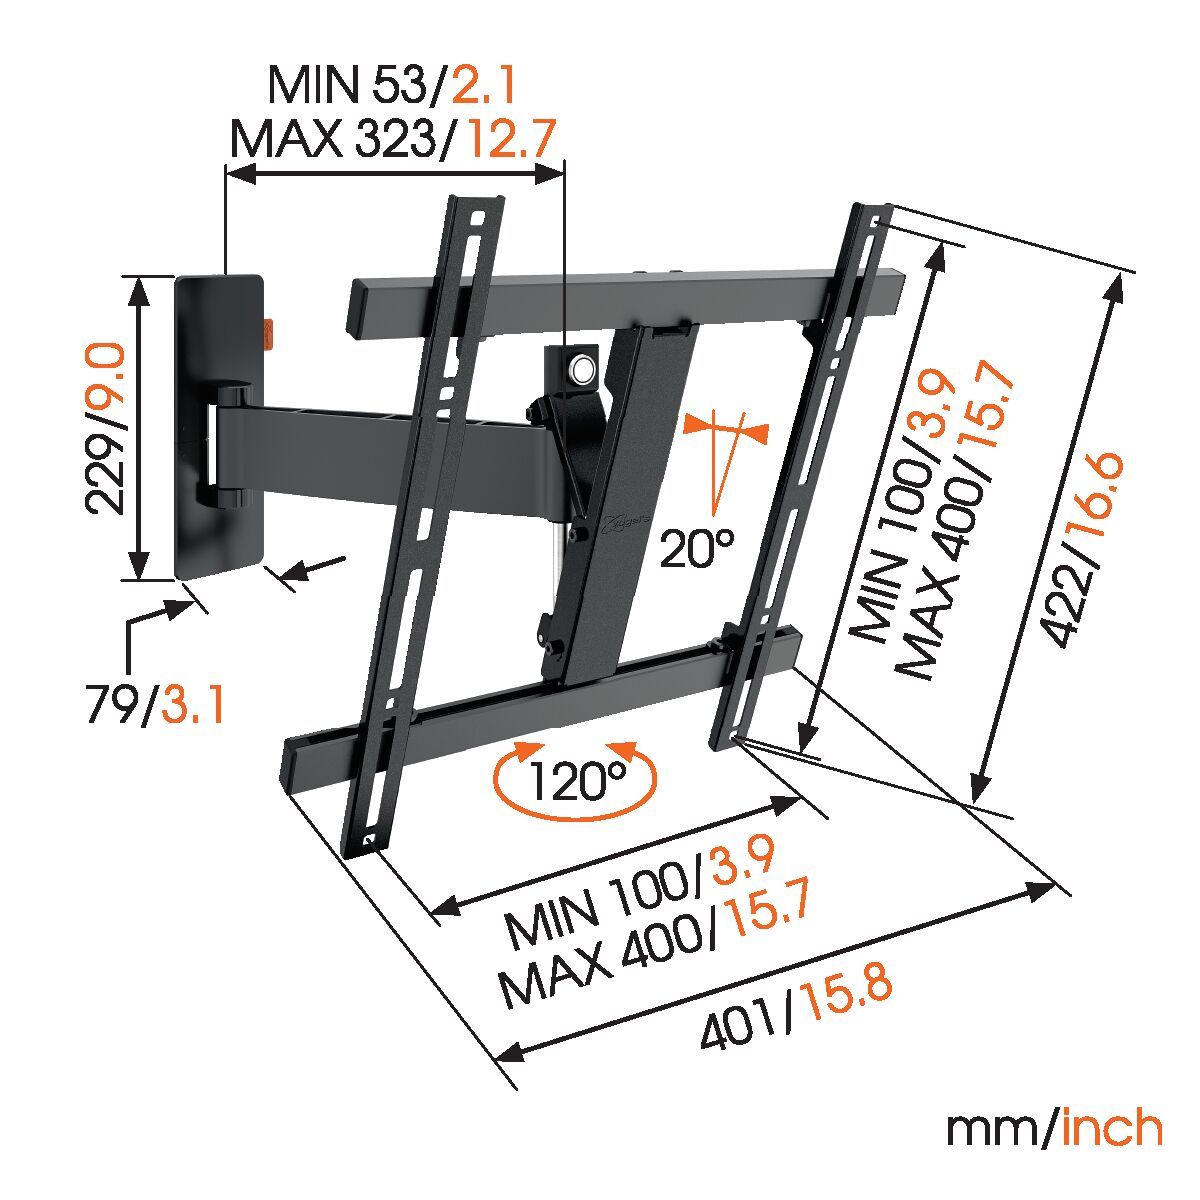 Vogel's WALL 3225 Full-Motion TV Wall Mount - Suitable for 32 up to 55 inch TVs - Motion (up to 120°) - Tilt up to 20° - Dimensions